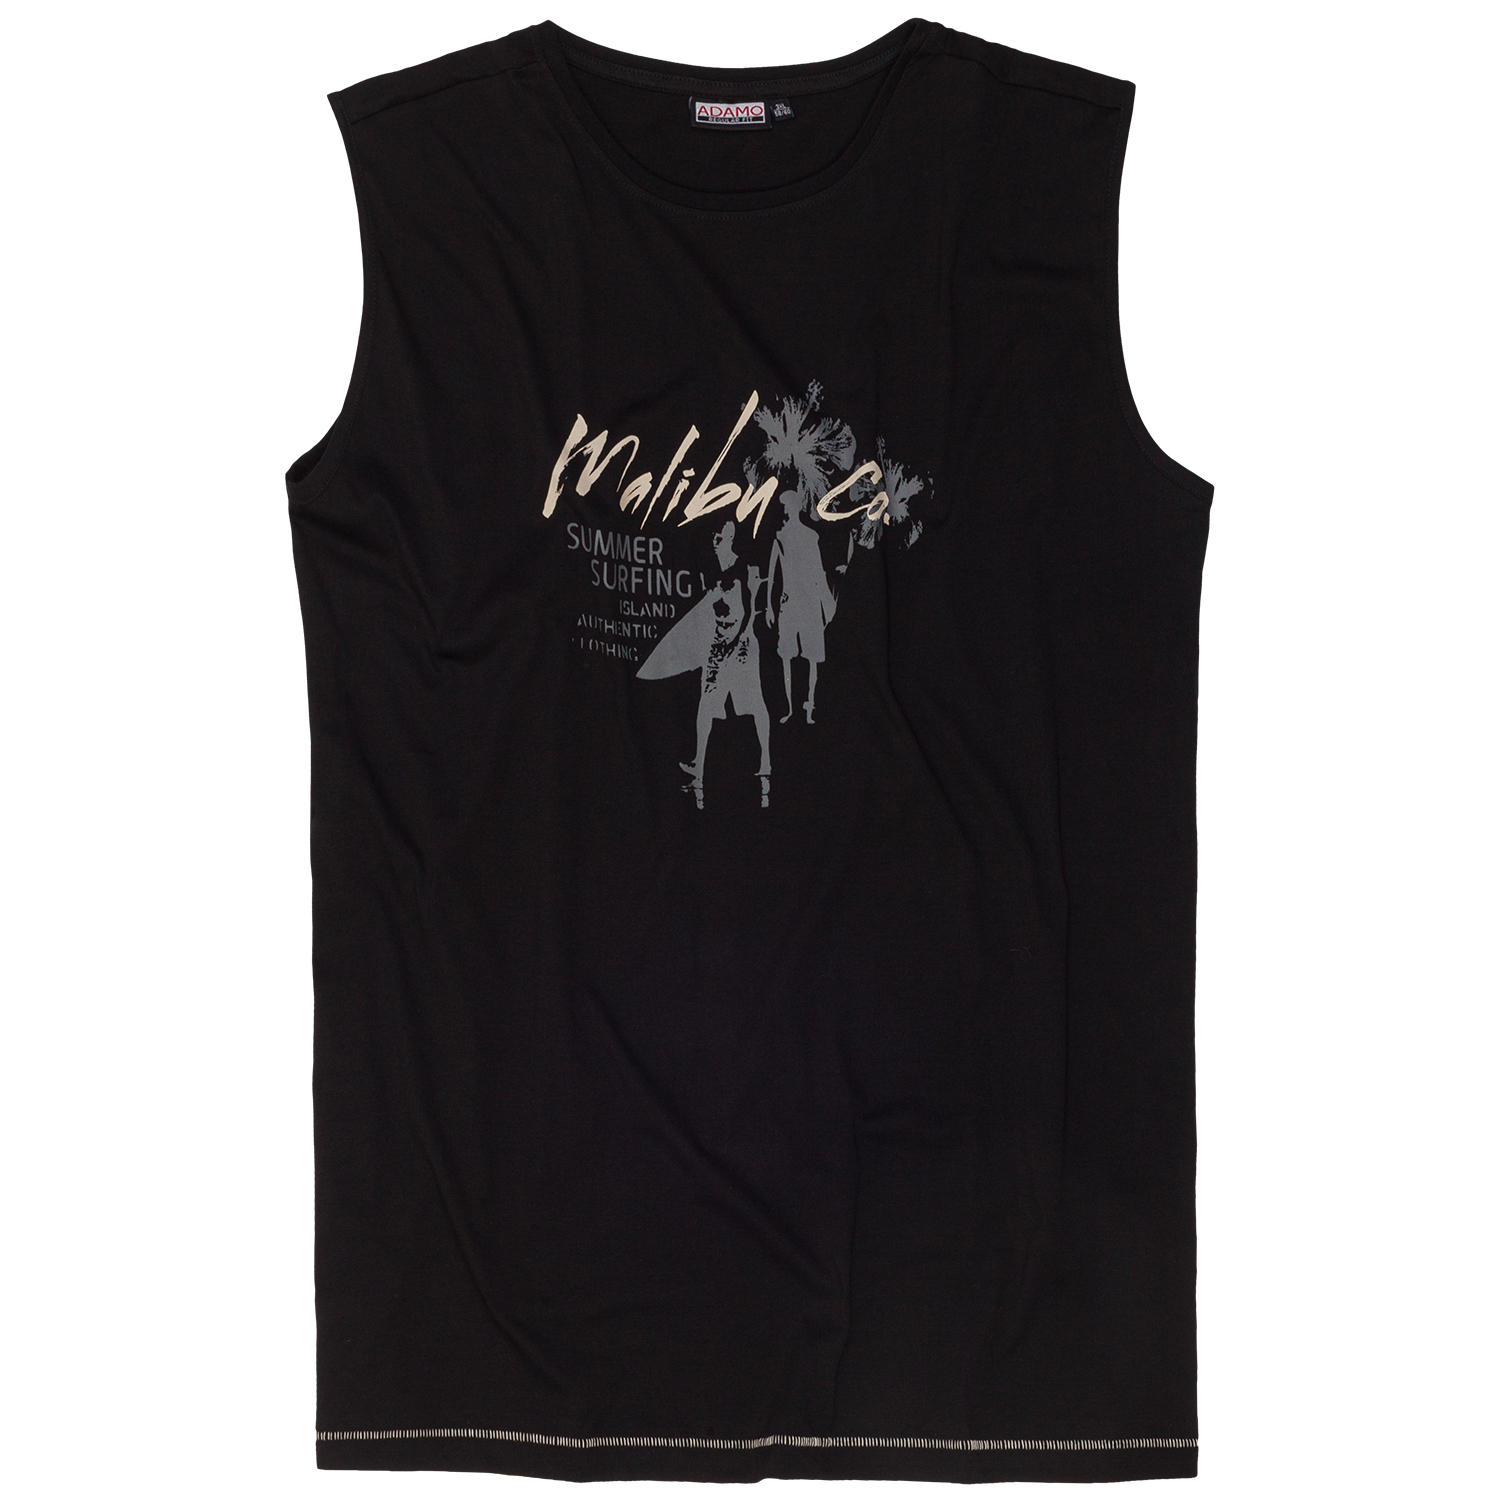 Tank top "Malibu" in black with imprint by Adamo for men up to oversize 10XL